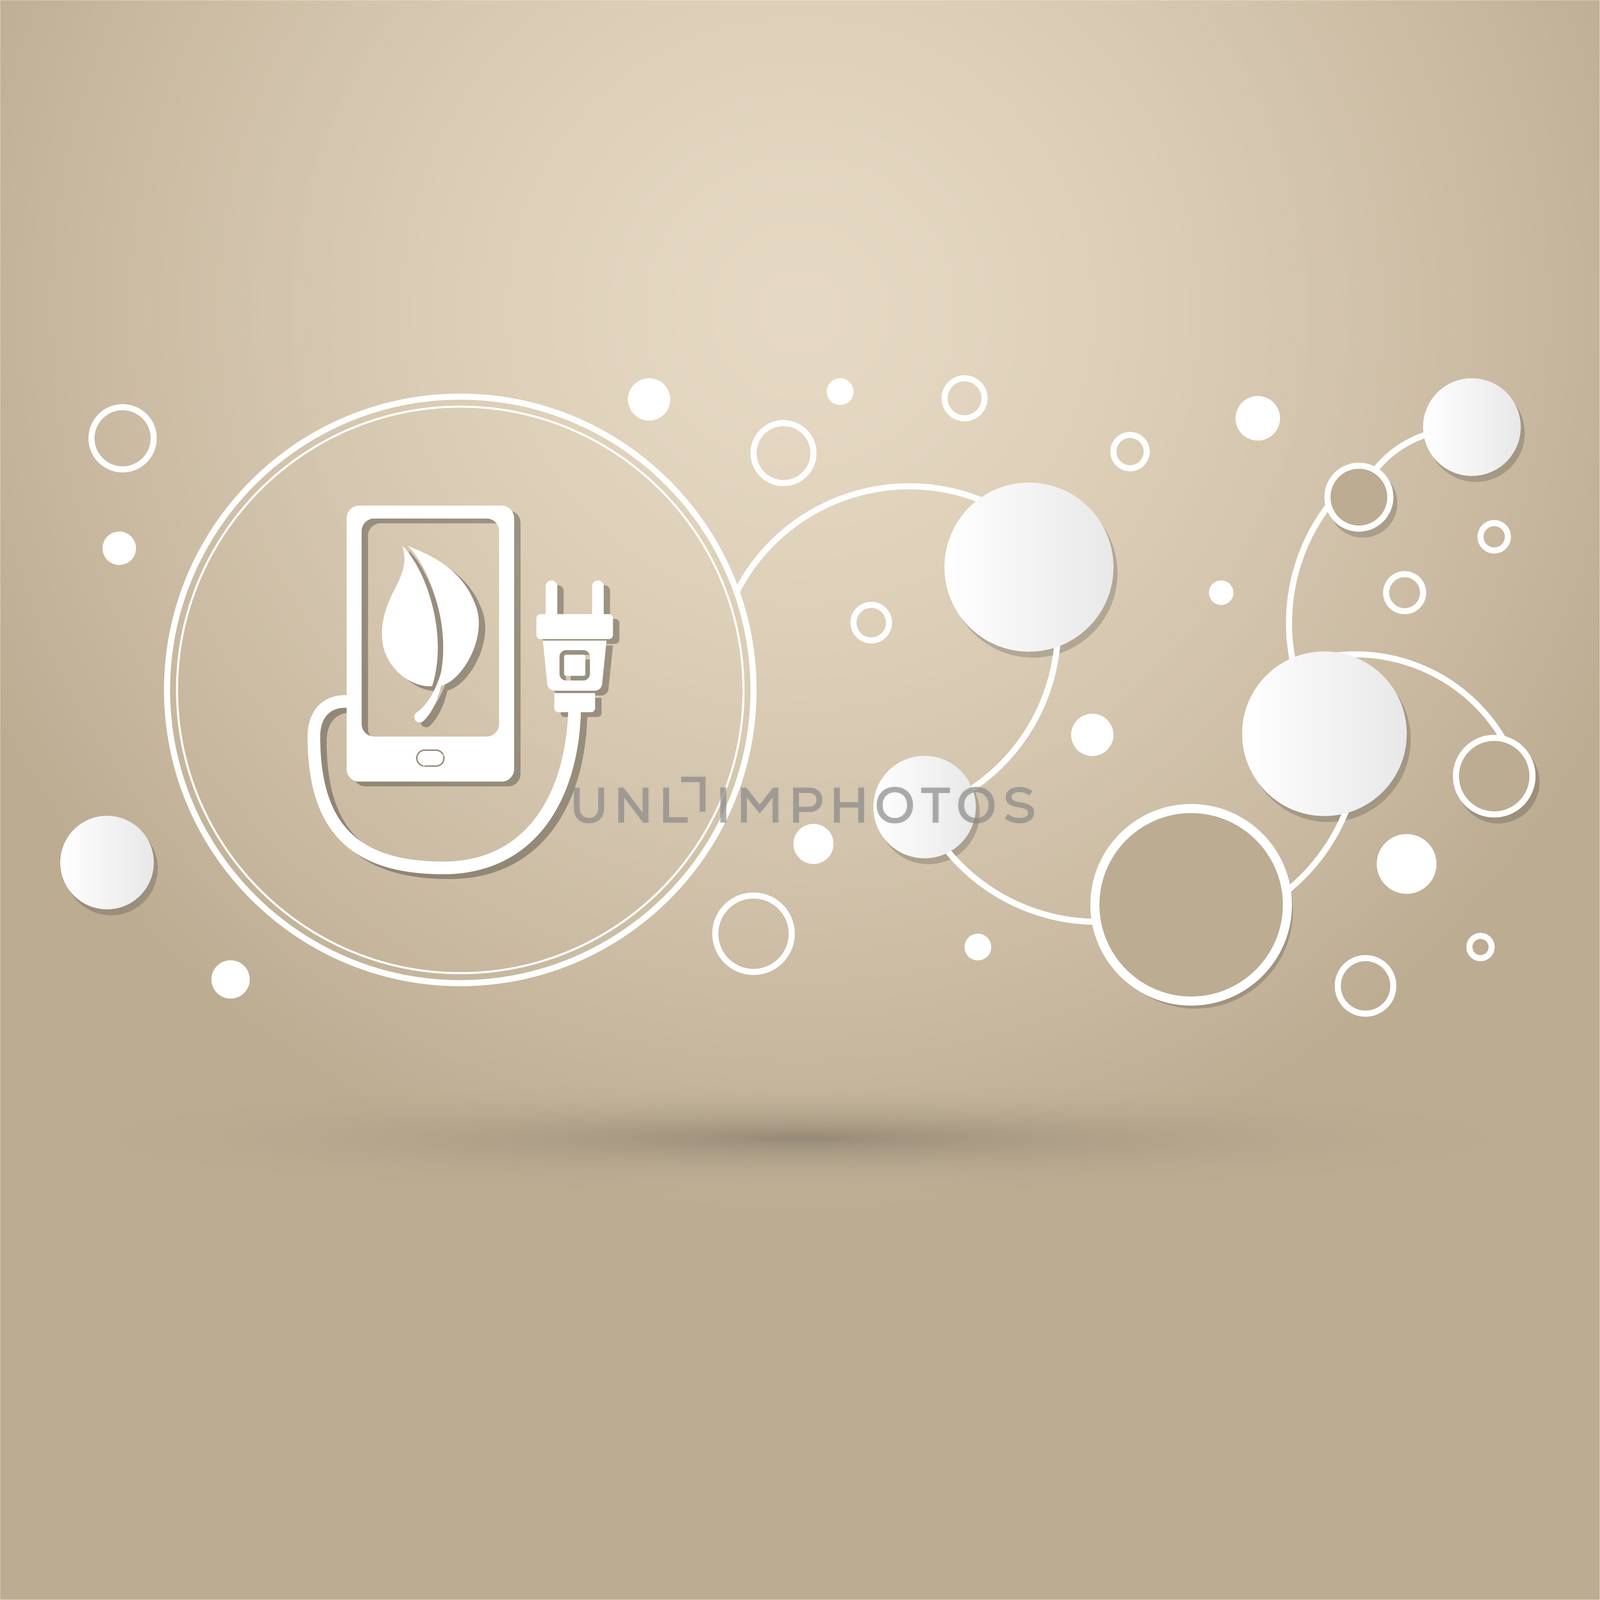 charge eco power, usb cable is connected to the phone icon on a brown background with elegant style and modern design infographic.  by Adamchuk